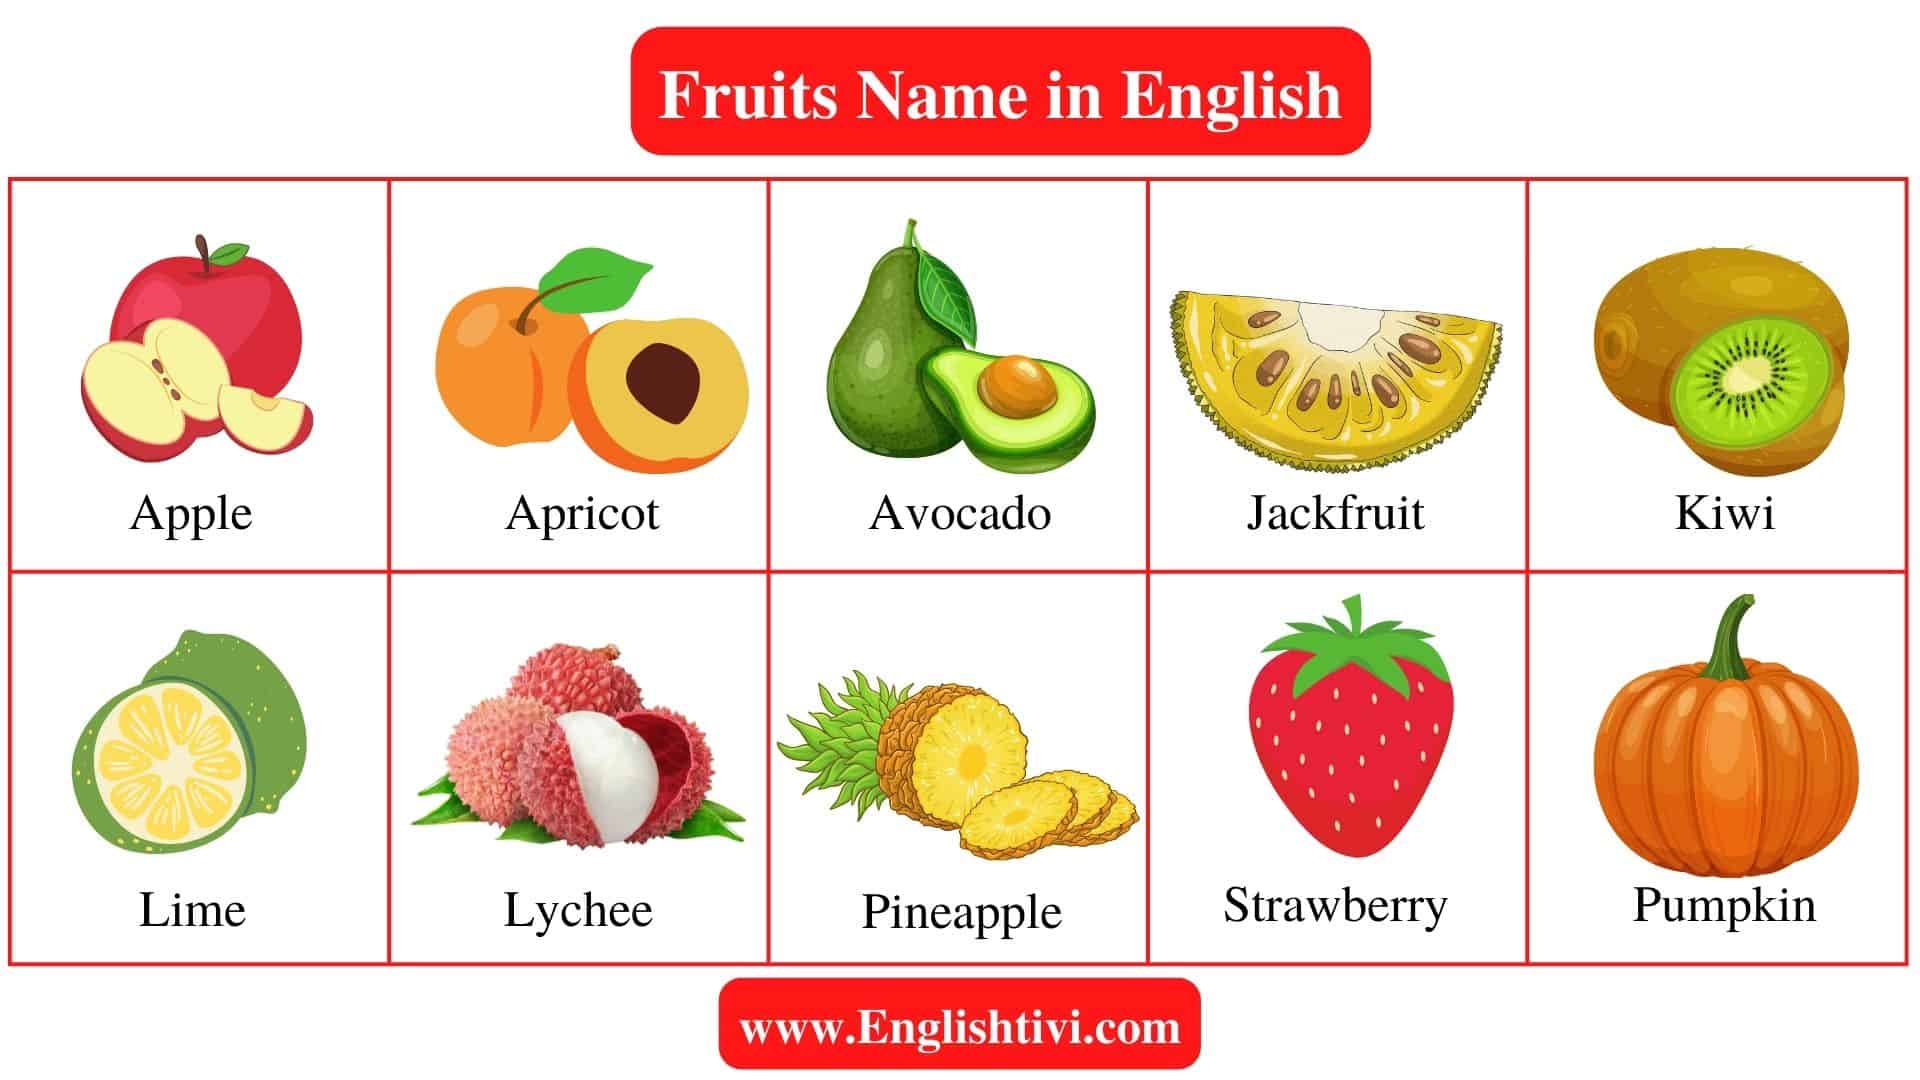 Fruits Name: List of Fruits Name in English with Pictures - Englishtivi